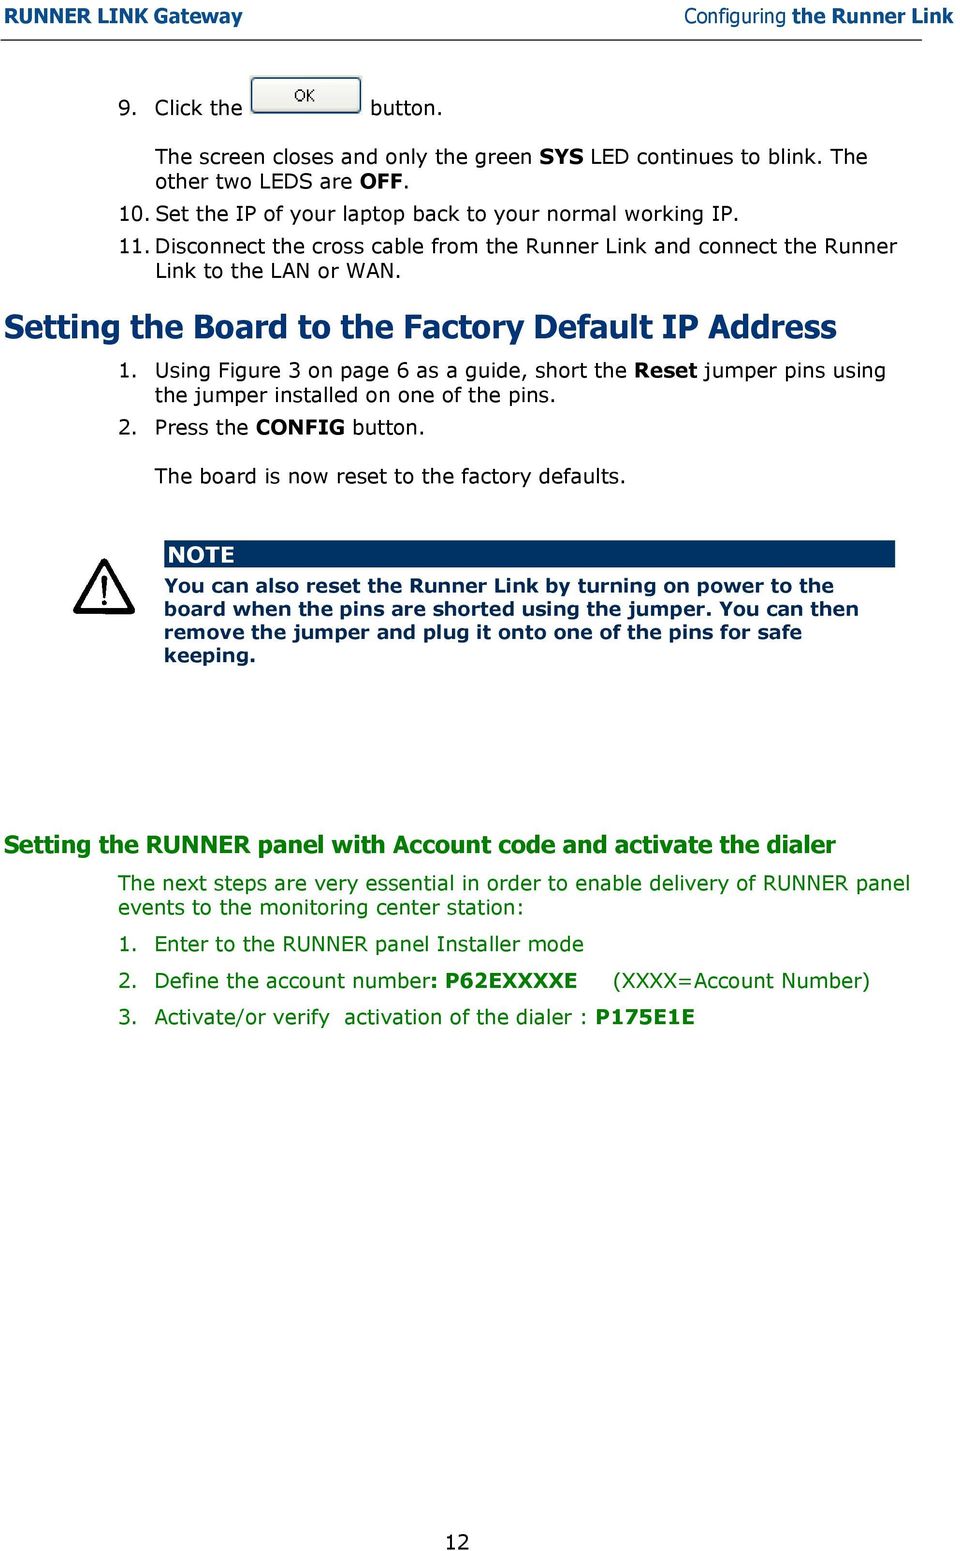 Setting the Board to the Factory Default IP Address 1. Using Figure 3 on page 6 as a guide, short the Reset jumper pins using the jumper installed on one of the pins. 2. Press the CONFIG button.